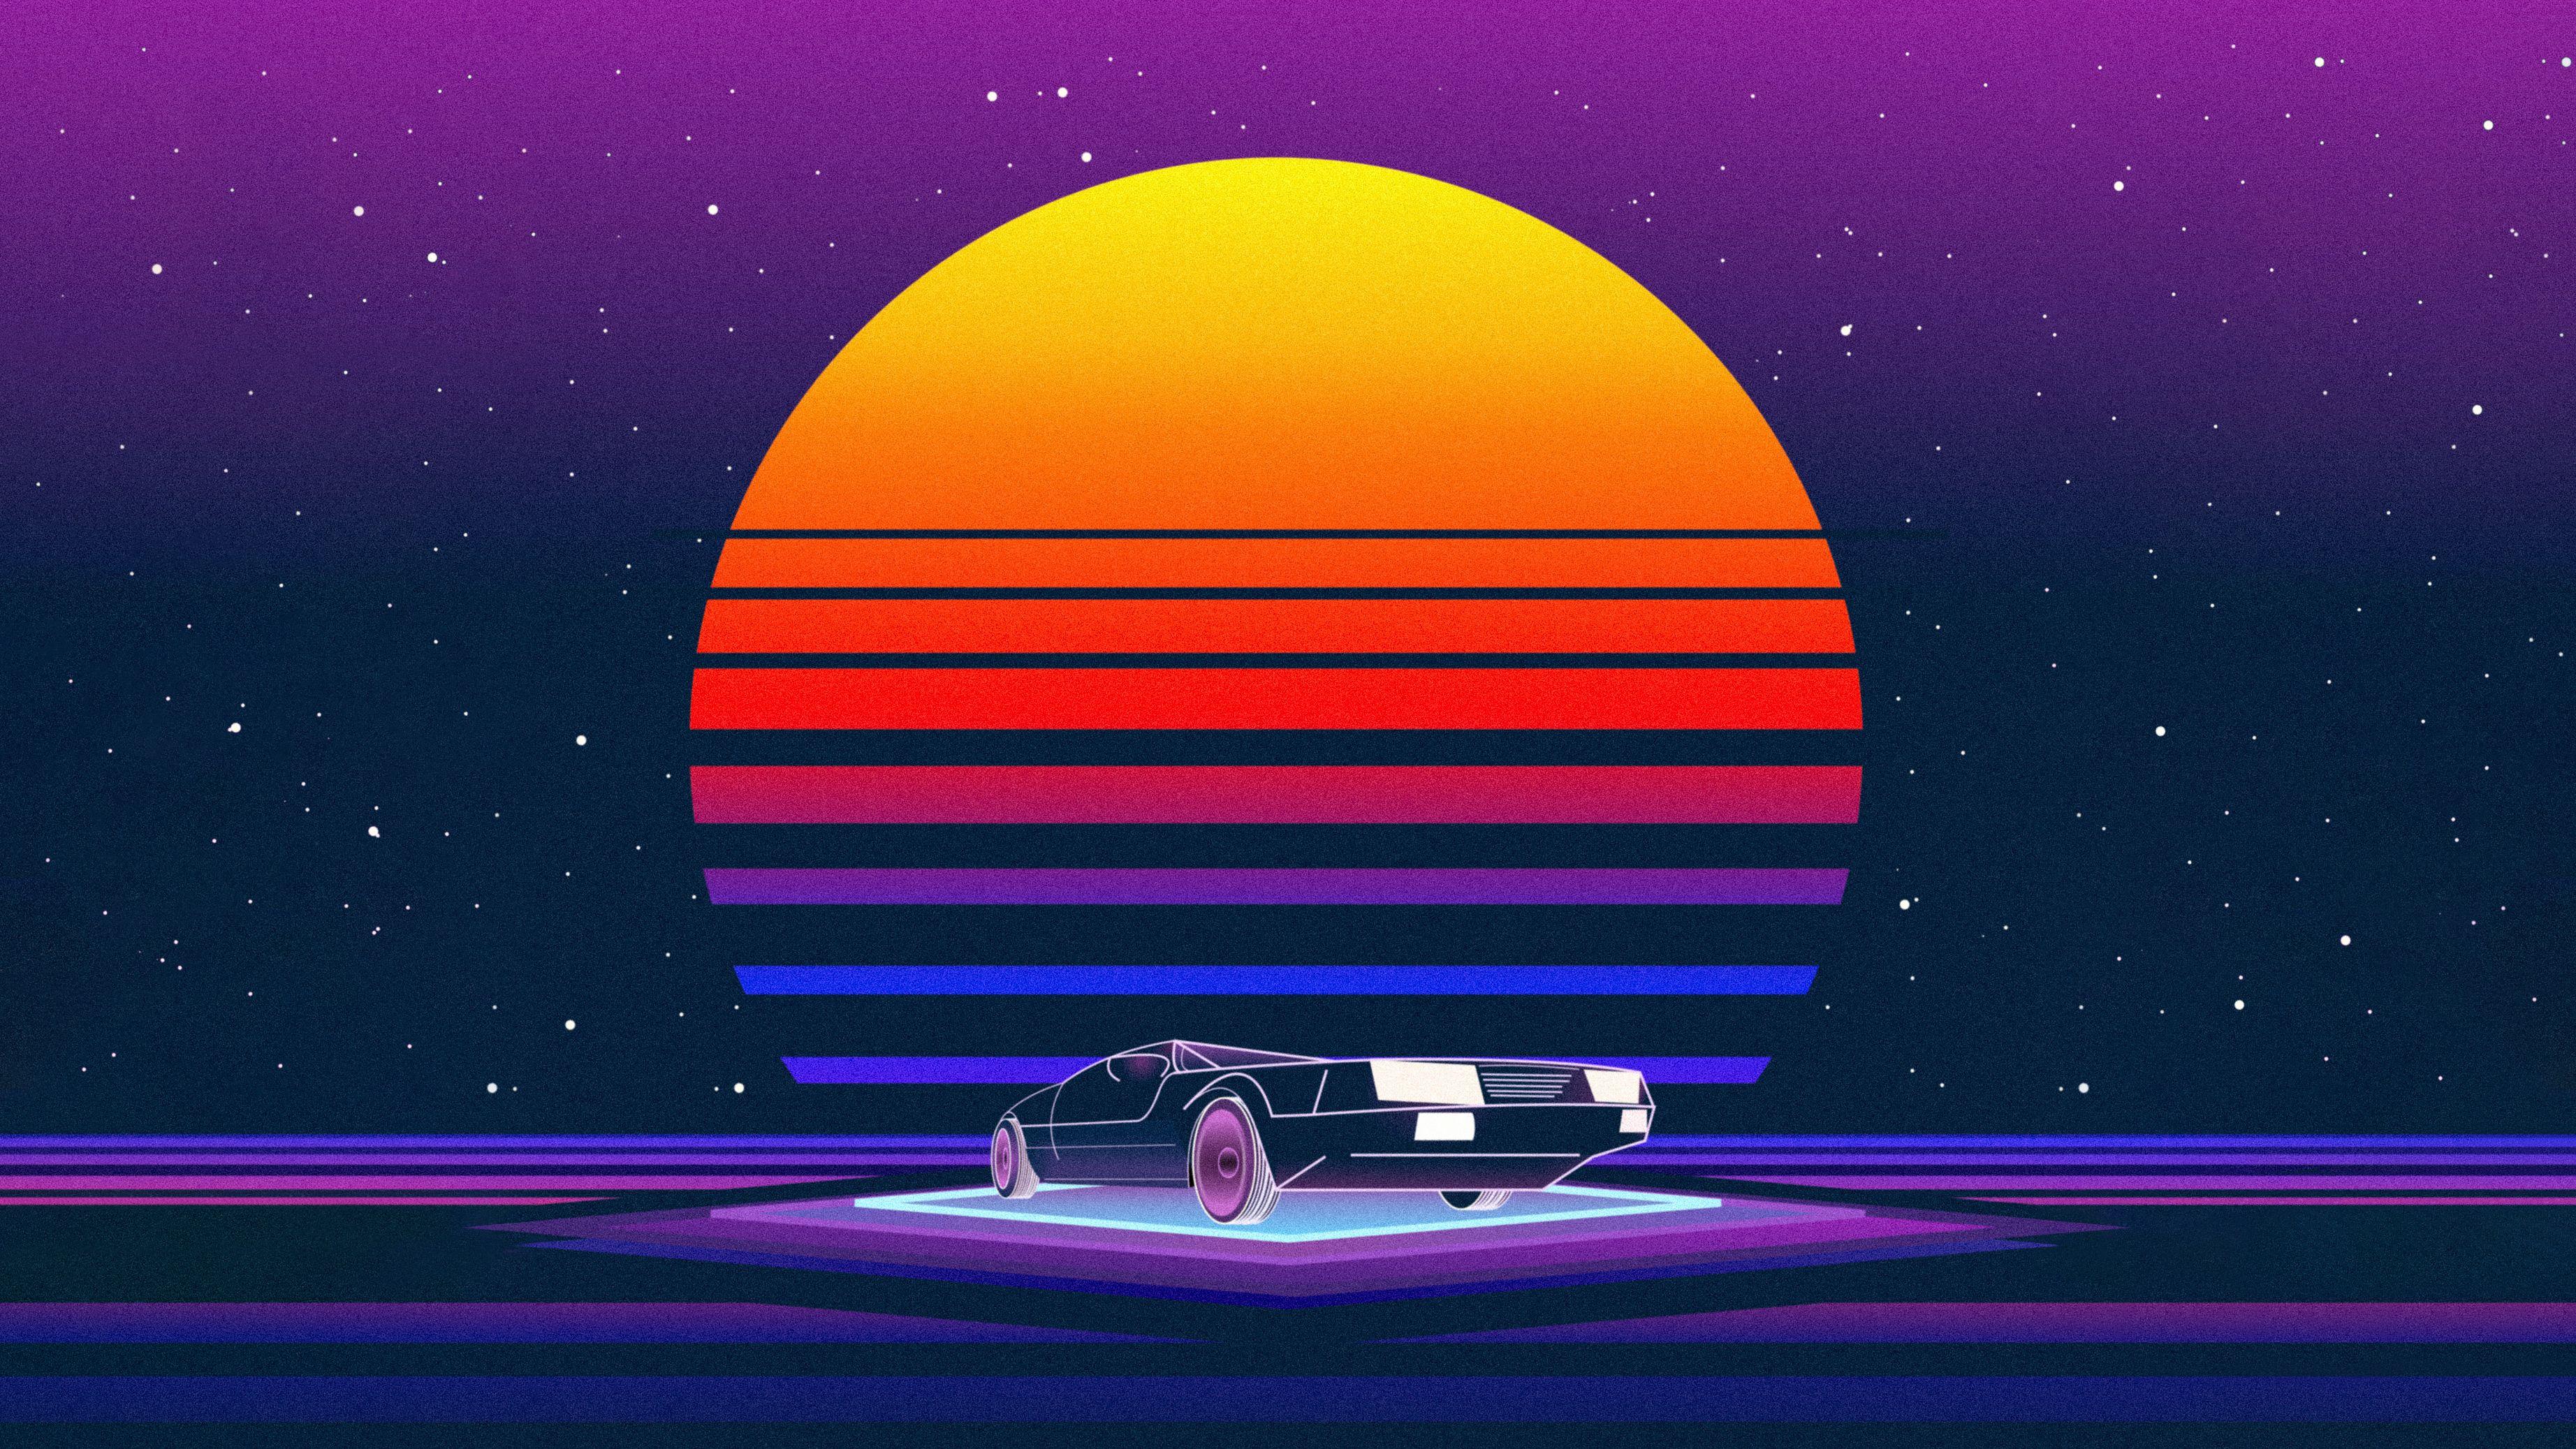  Retro  Wave  Wallpapers  Top Free Retro  Wave  Backgrounds 